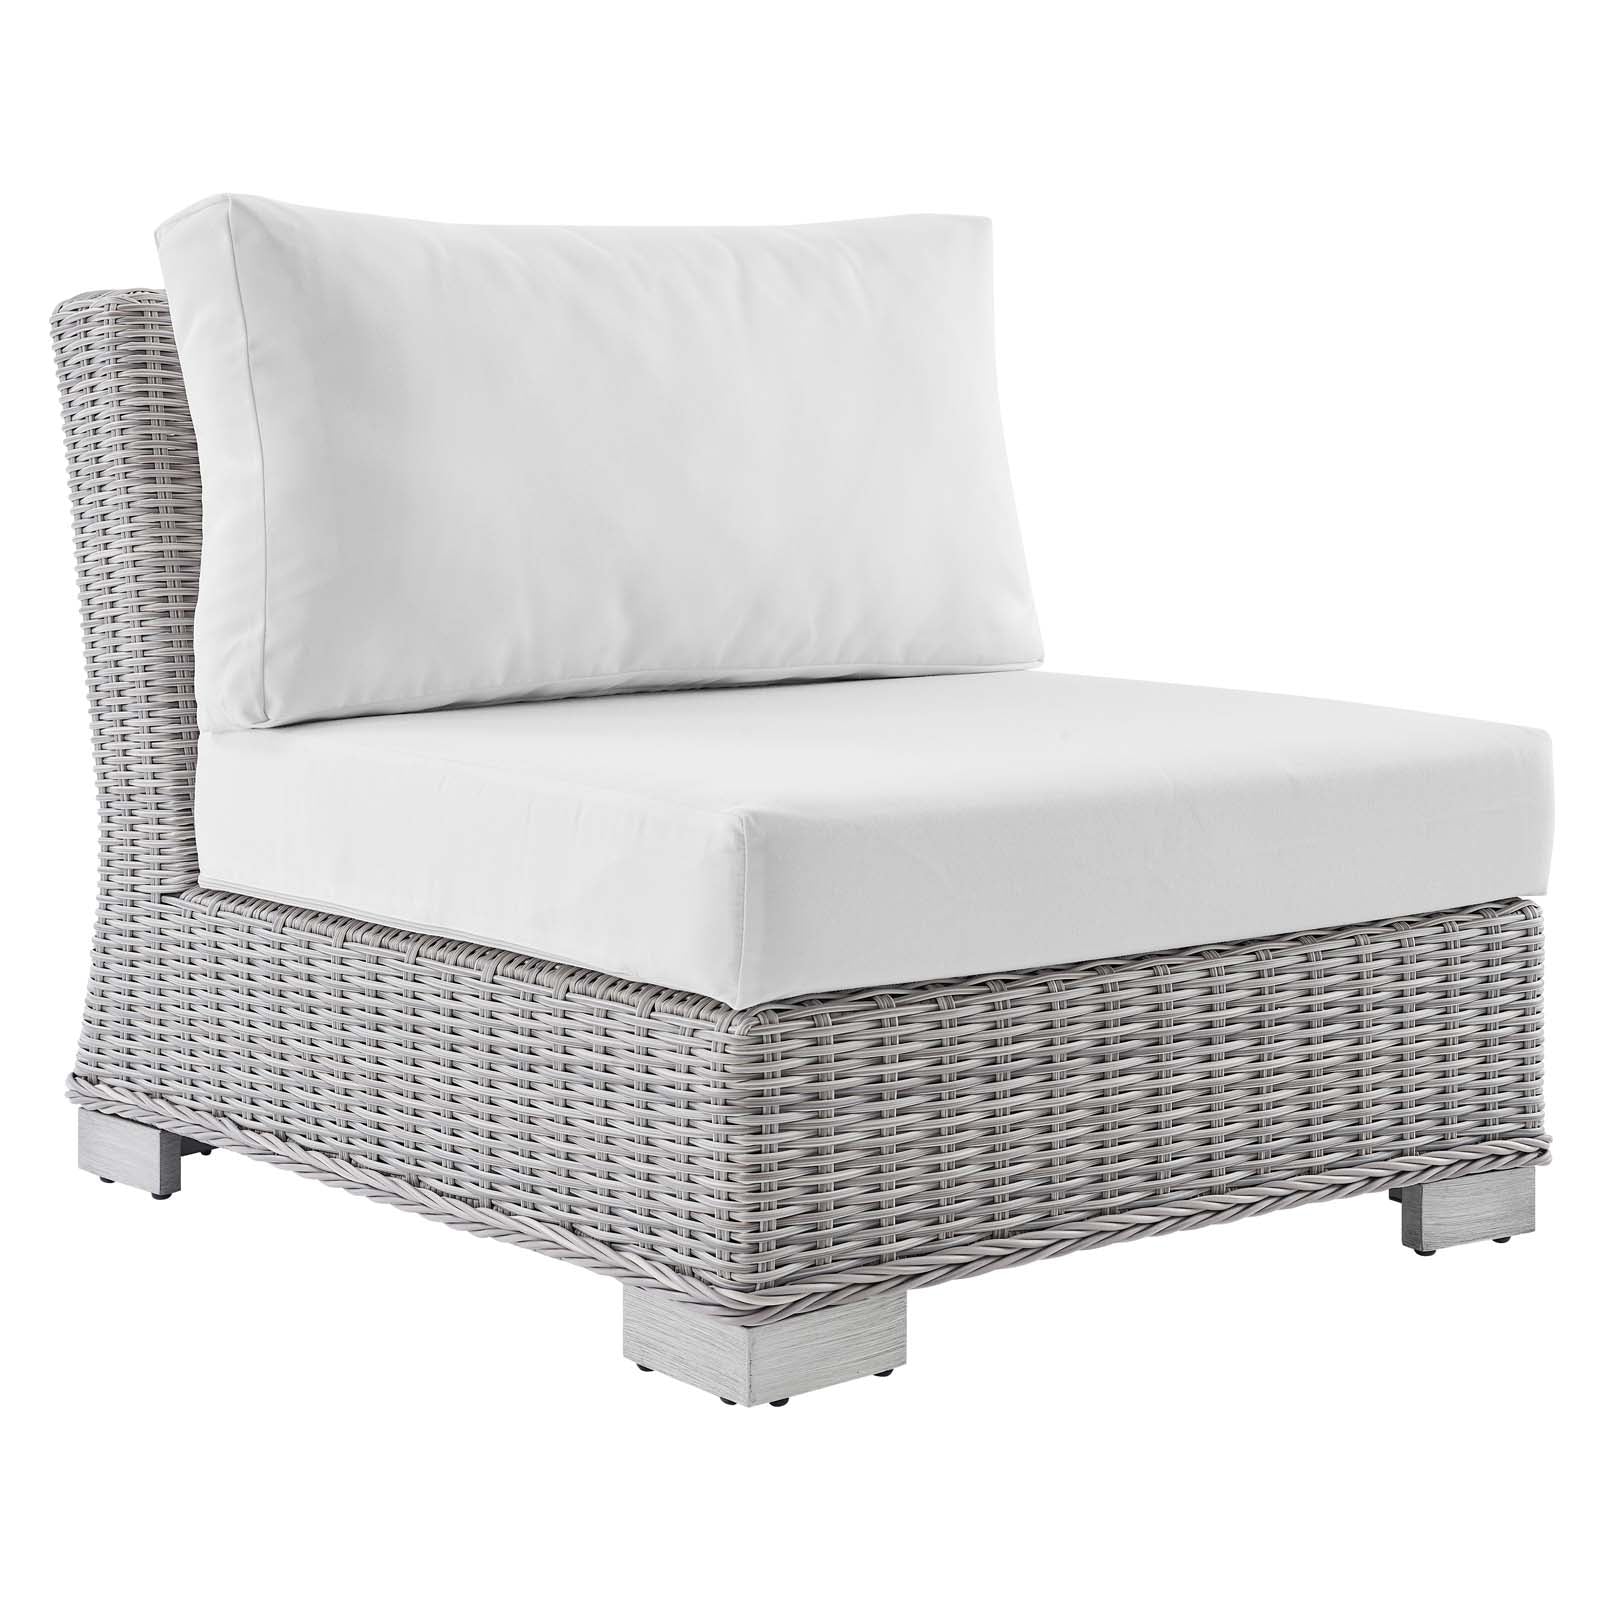 Modway Outdoor Chairs - Conway Sunbrella Outdoor Patio Wicker Rattan Armless Chair Light Gray White